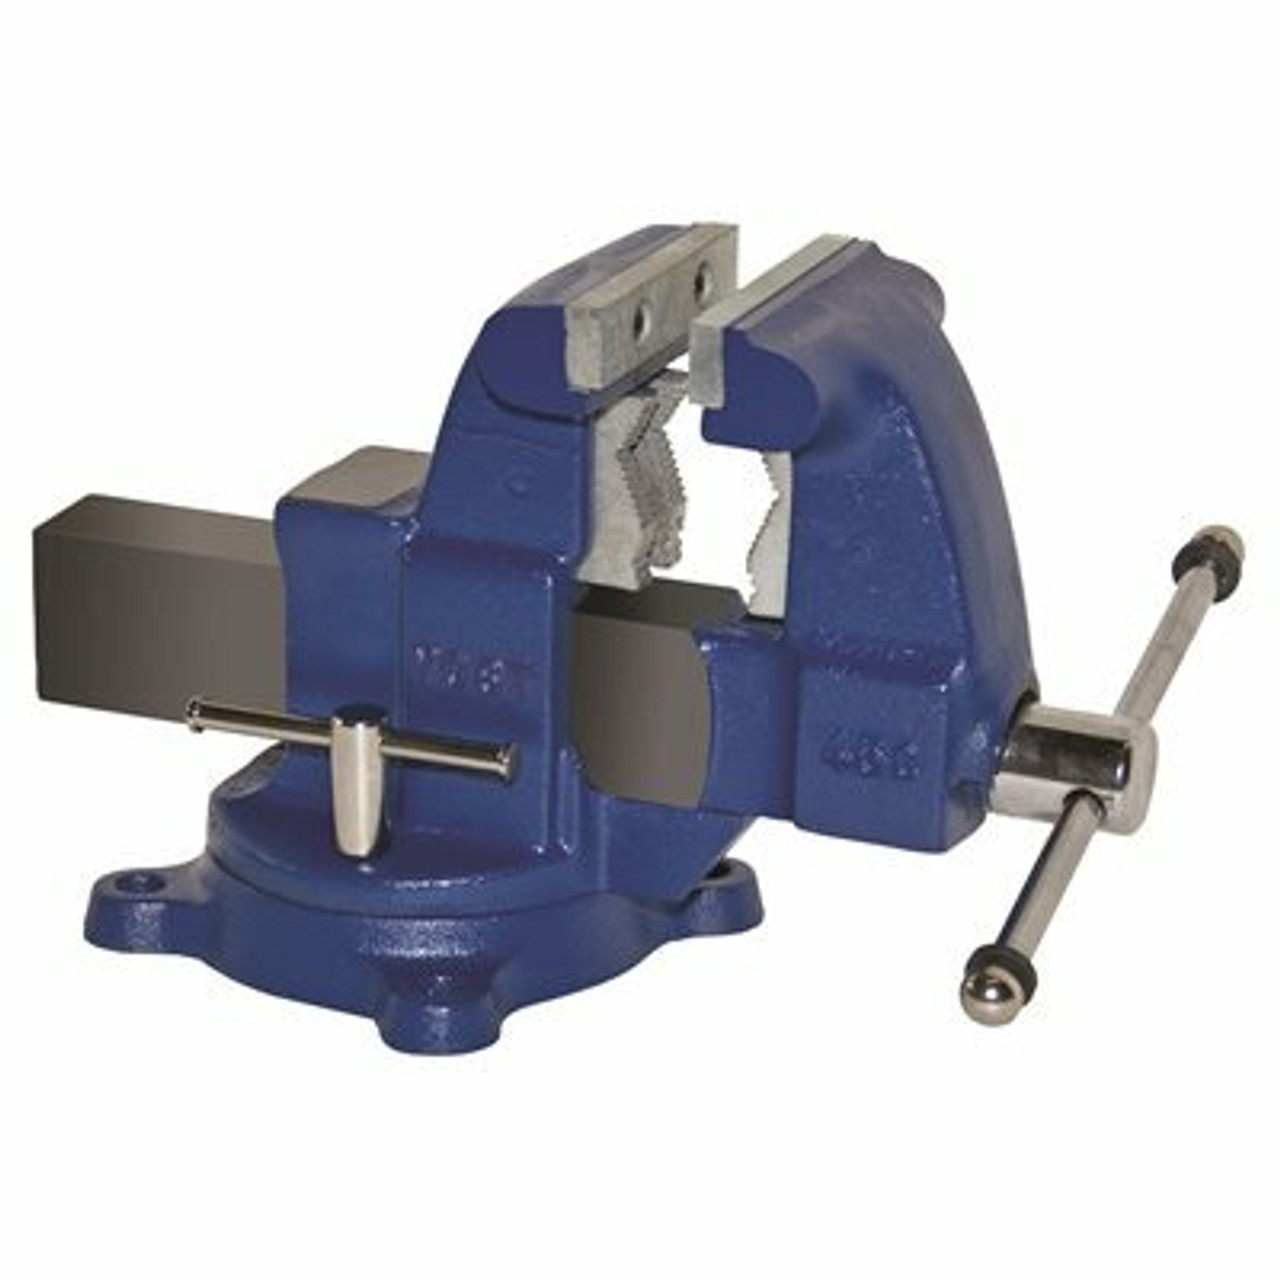 Yost 4-1/2 In. Medium Duty Tradesman Combination Pipe And Bench Vise - Swivel Base